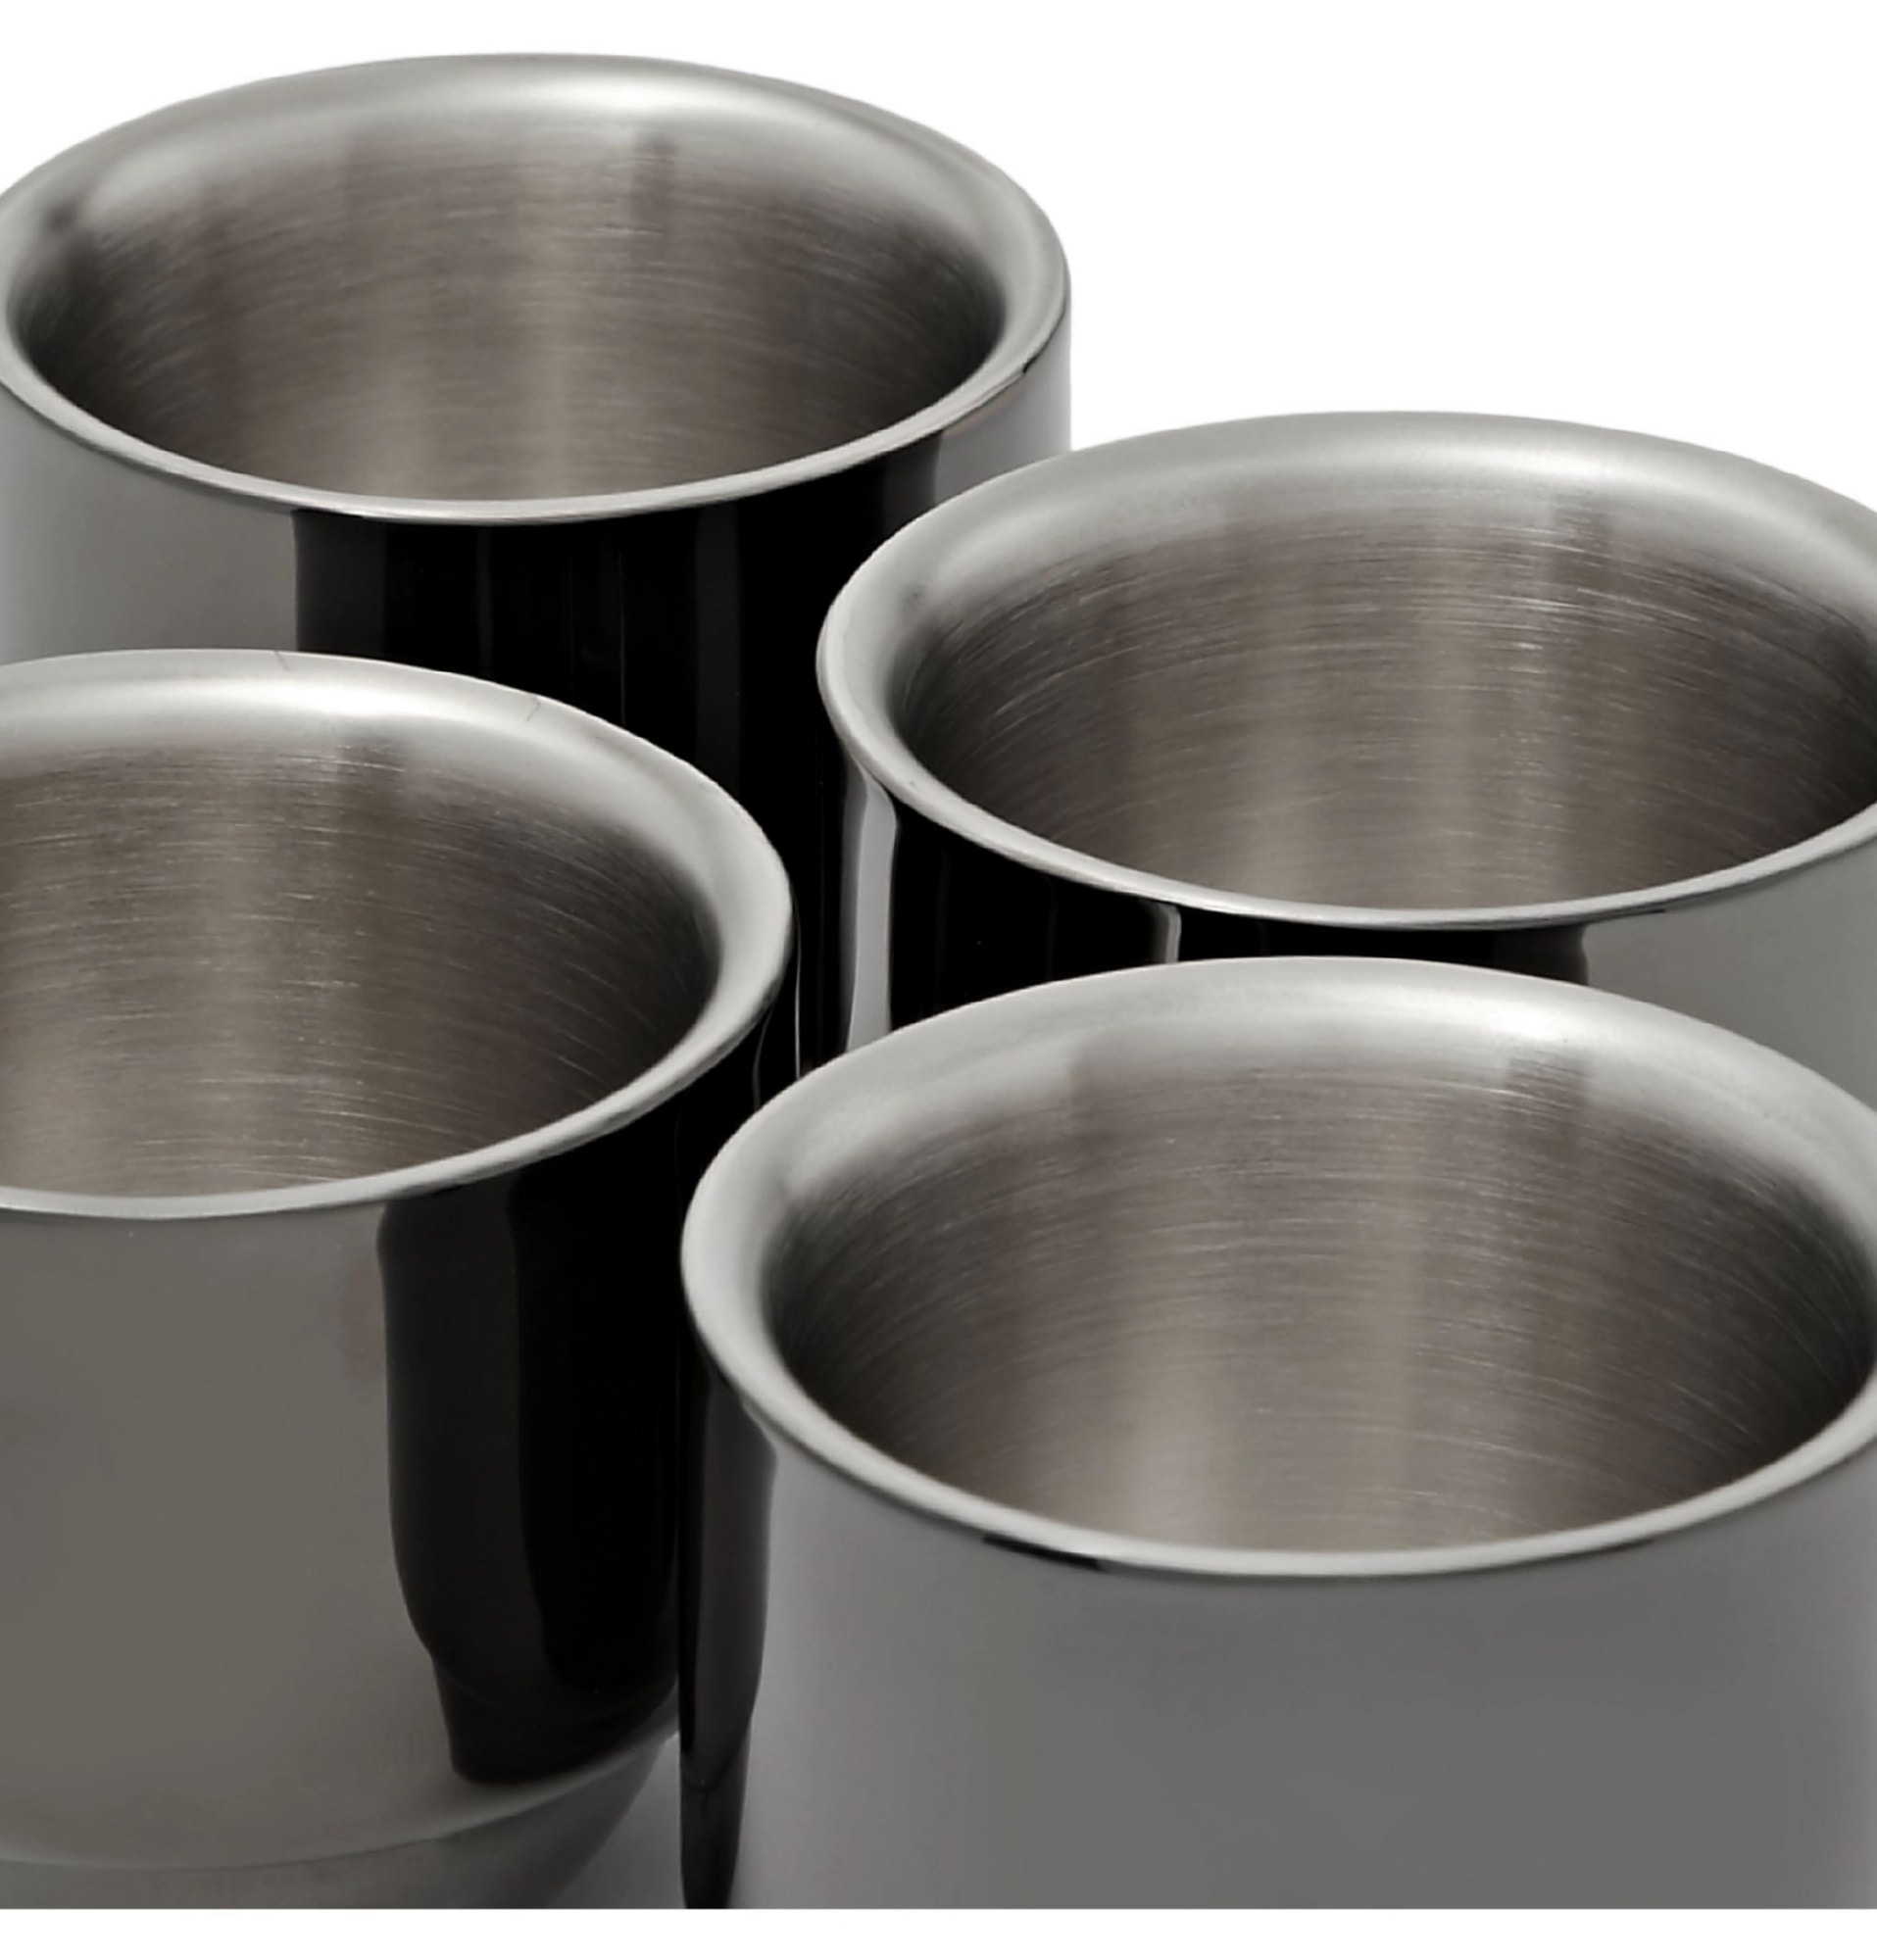 brew-coated-stainless-steel-cafetiere-set-3633577411207438